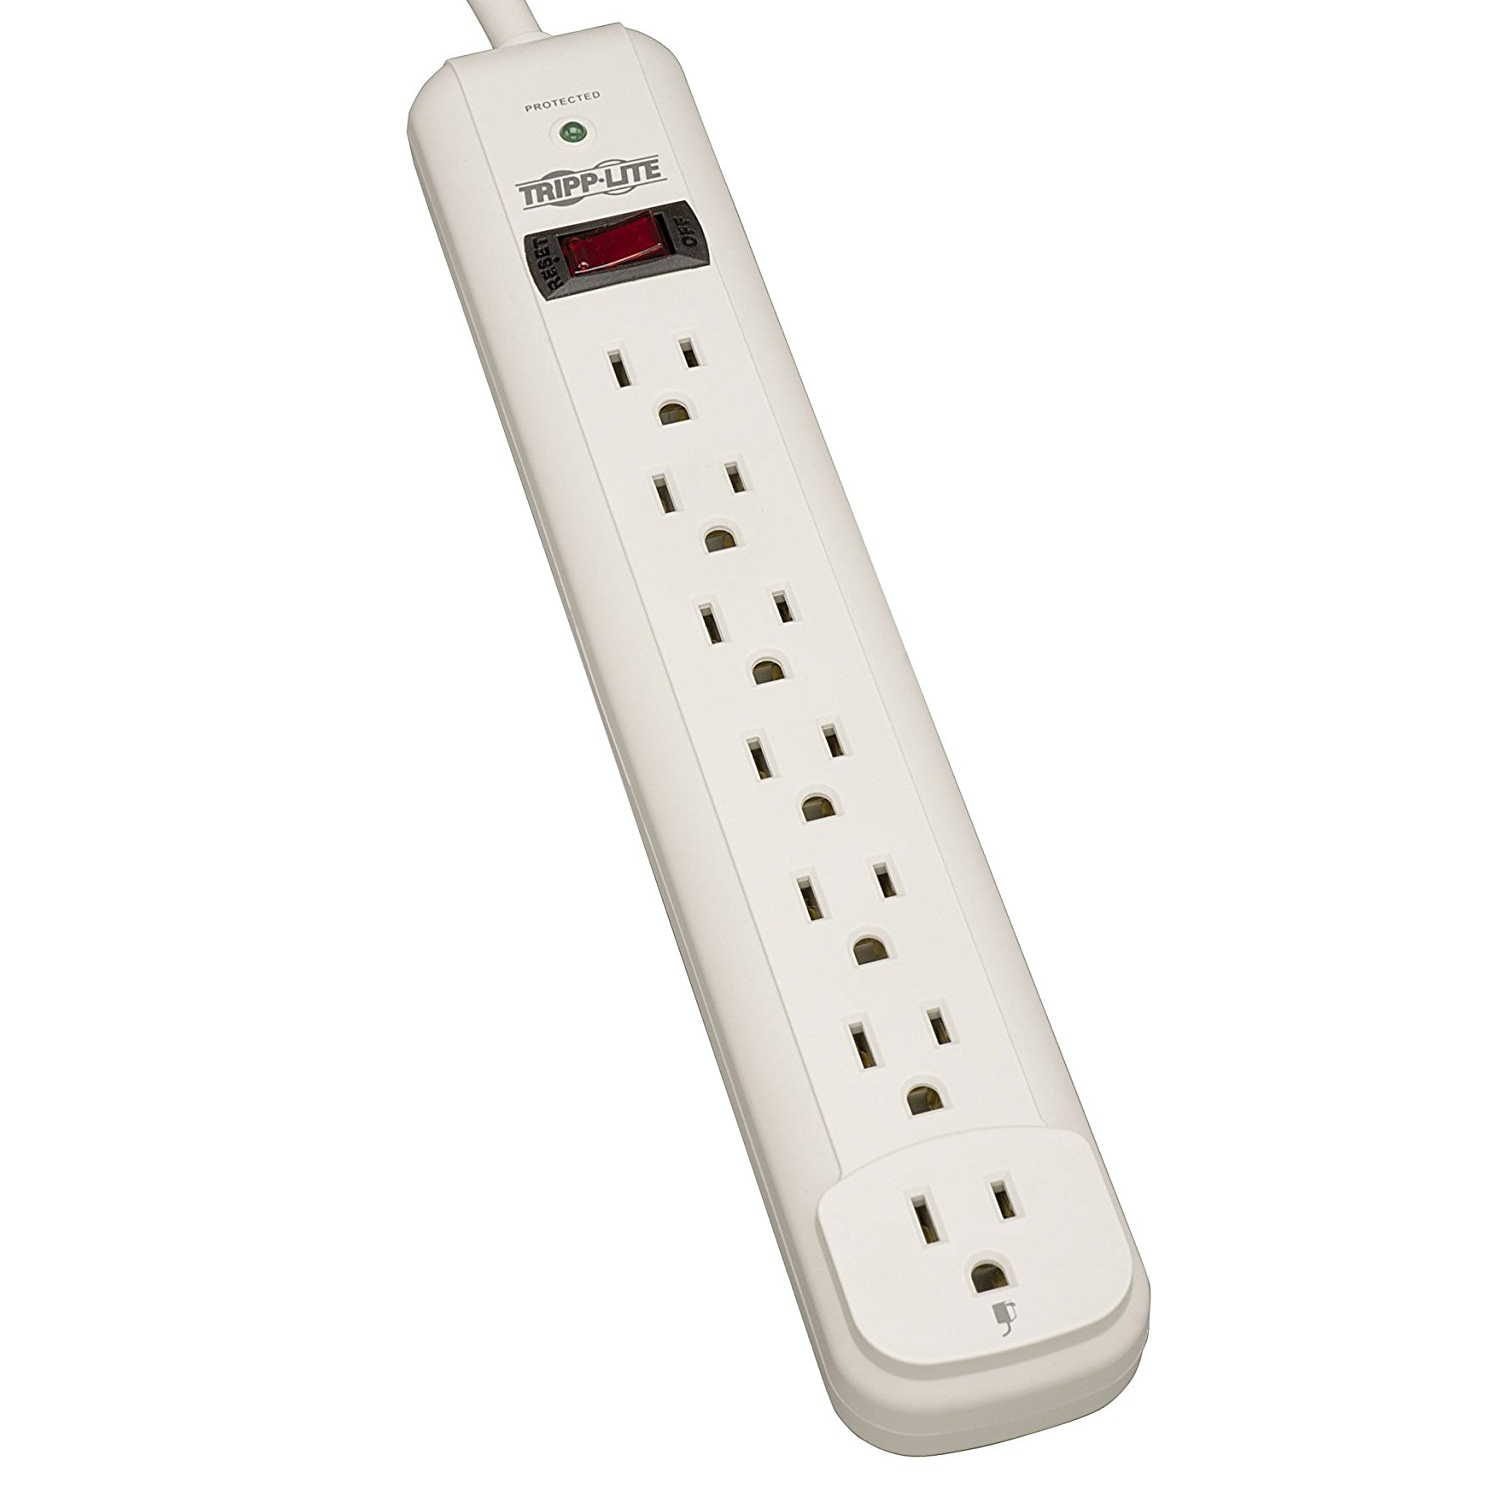 Tripp Lite 7 Outlet Surge Protector Power Strip 12ft Cord Only $15.19 Shipped!